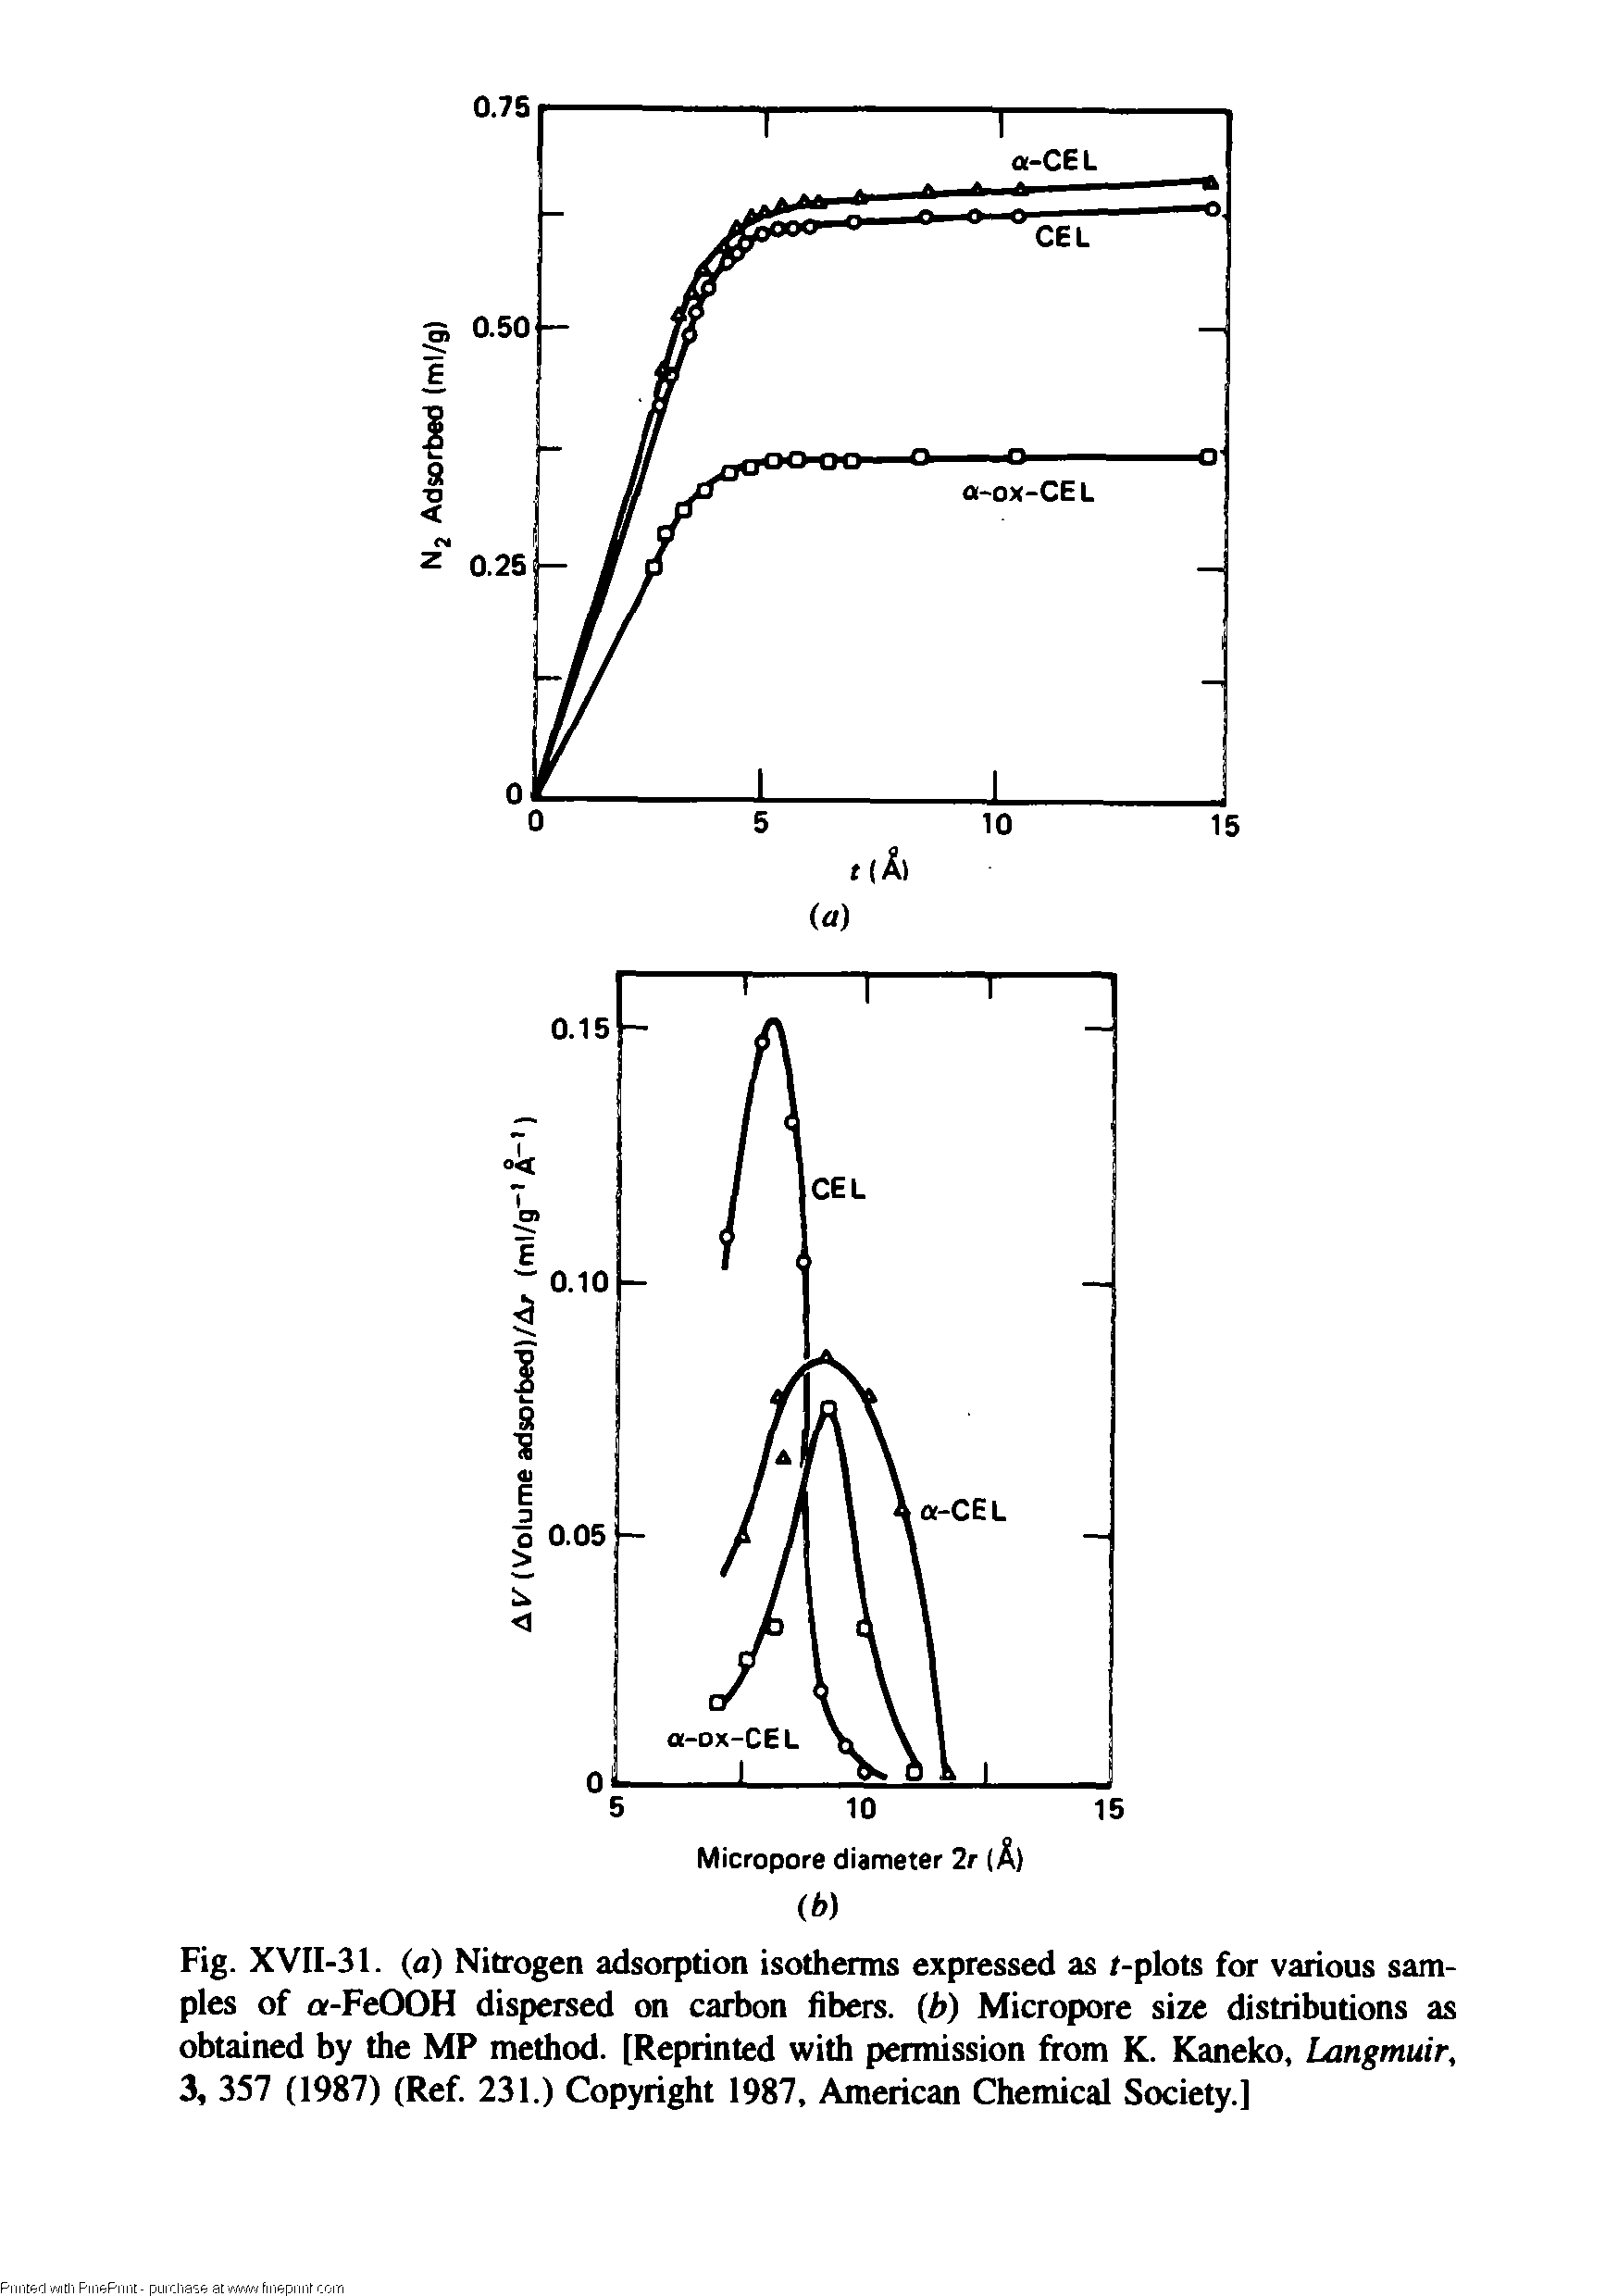 Fig. XVII-31. (a) Nitrogen adsorption isotherms expressed as /-plots for various samples of a-FeOOH dispersed on carbon fibers, (h) Micropore size distributions as obtained by the MP method. [Reprinted with permission from K. Kaneko, Langmuir, 3, 357 (1987) (Ref. 231.) Copyright 1987, American Chemical Society.]...